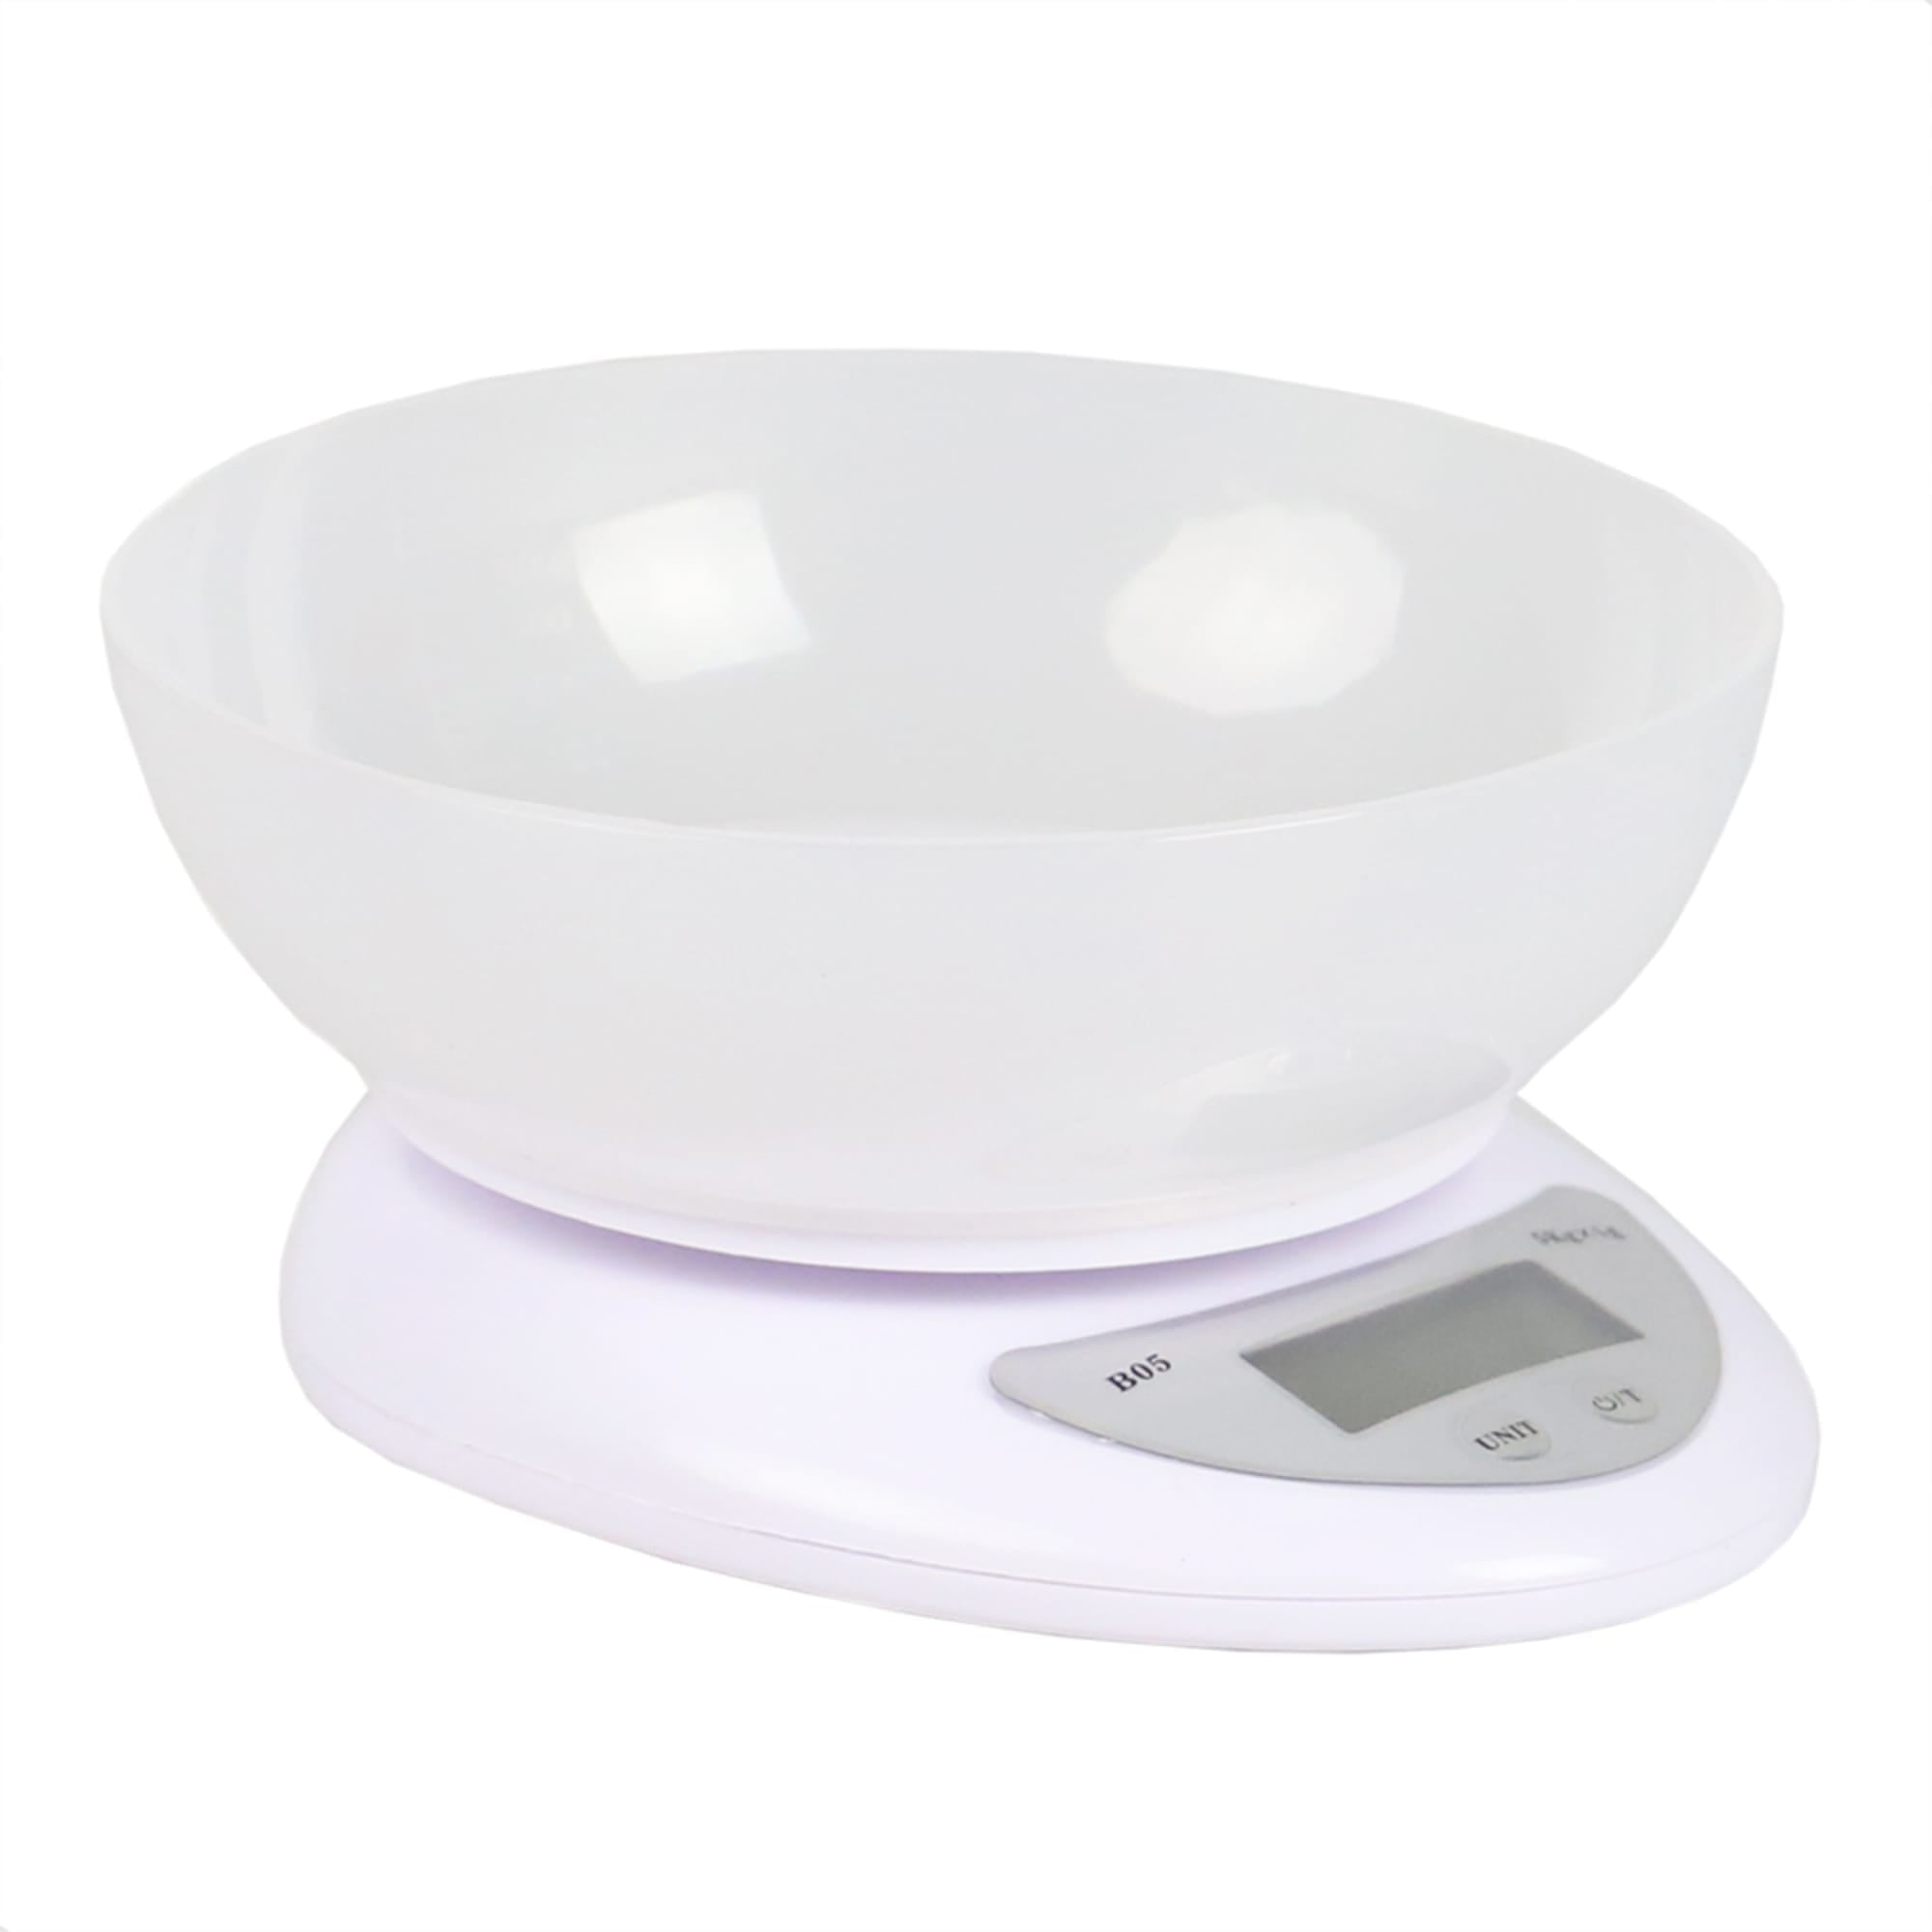 Home Basics  Digital Food Scale with Plastic Bowl, White $8.00 EACH, CASE PACK OF 12